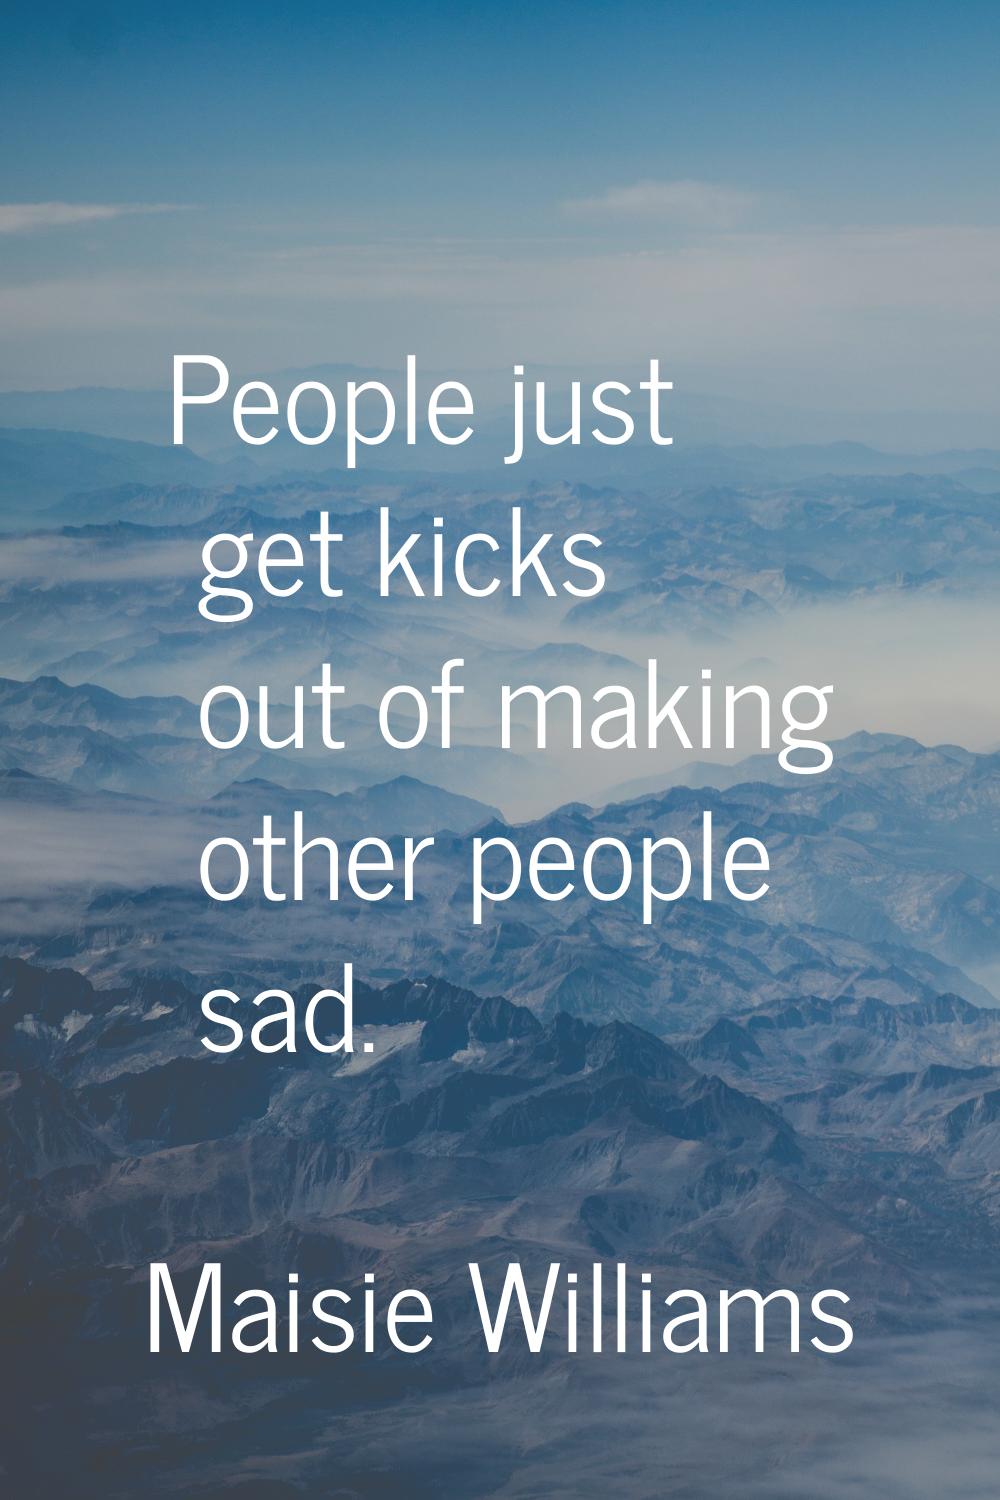 People just get kicks out of making other people sad.